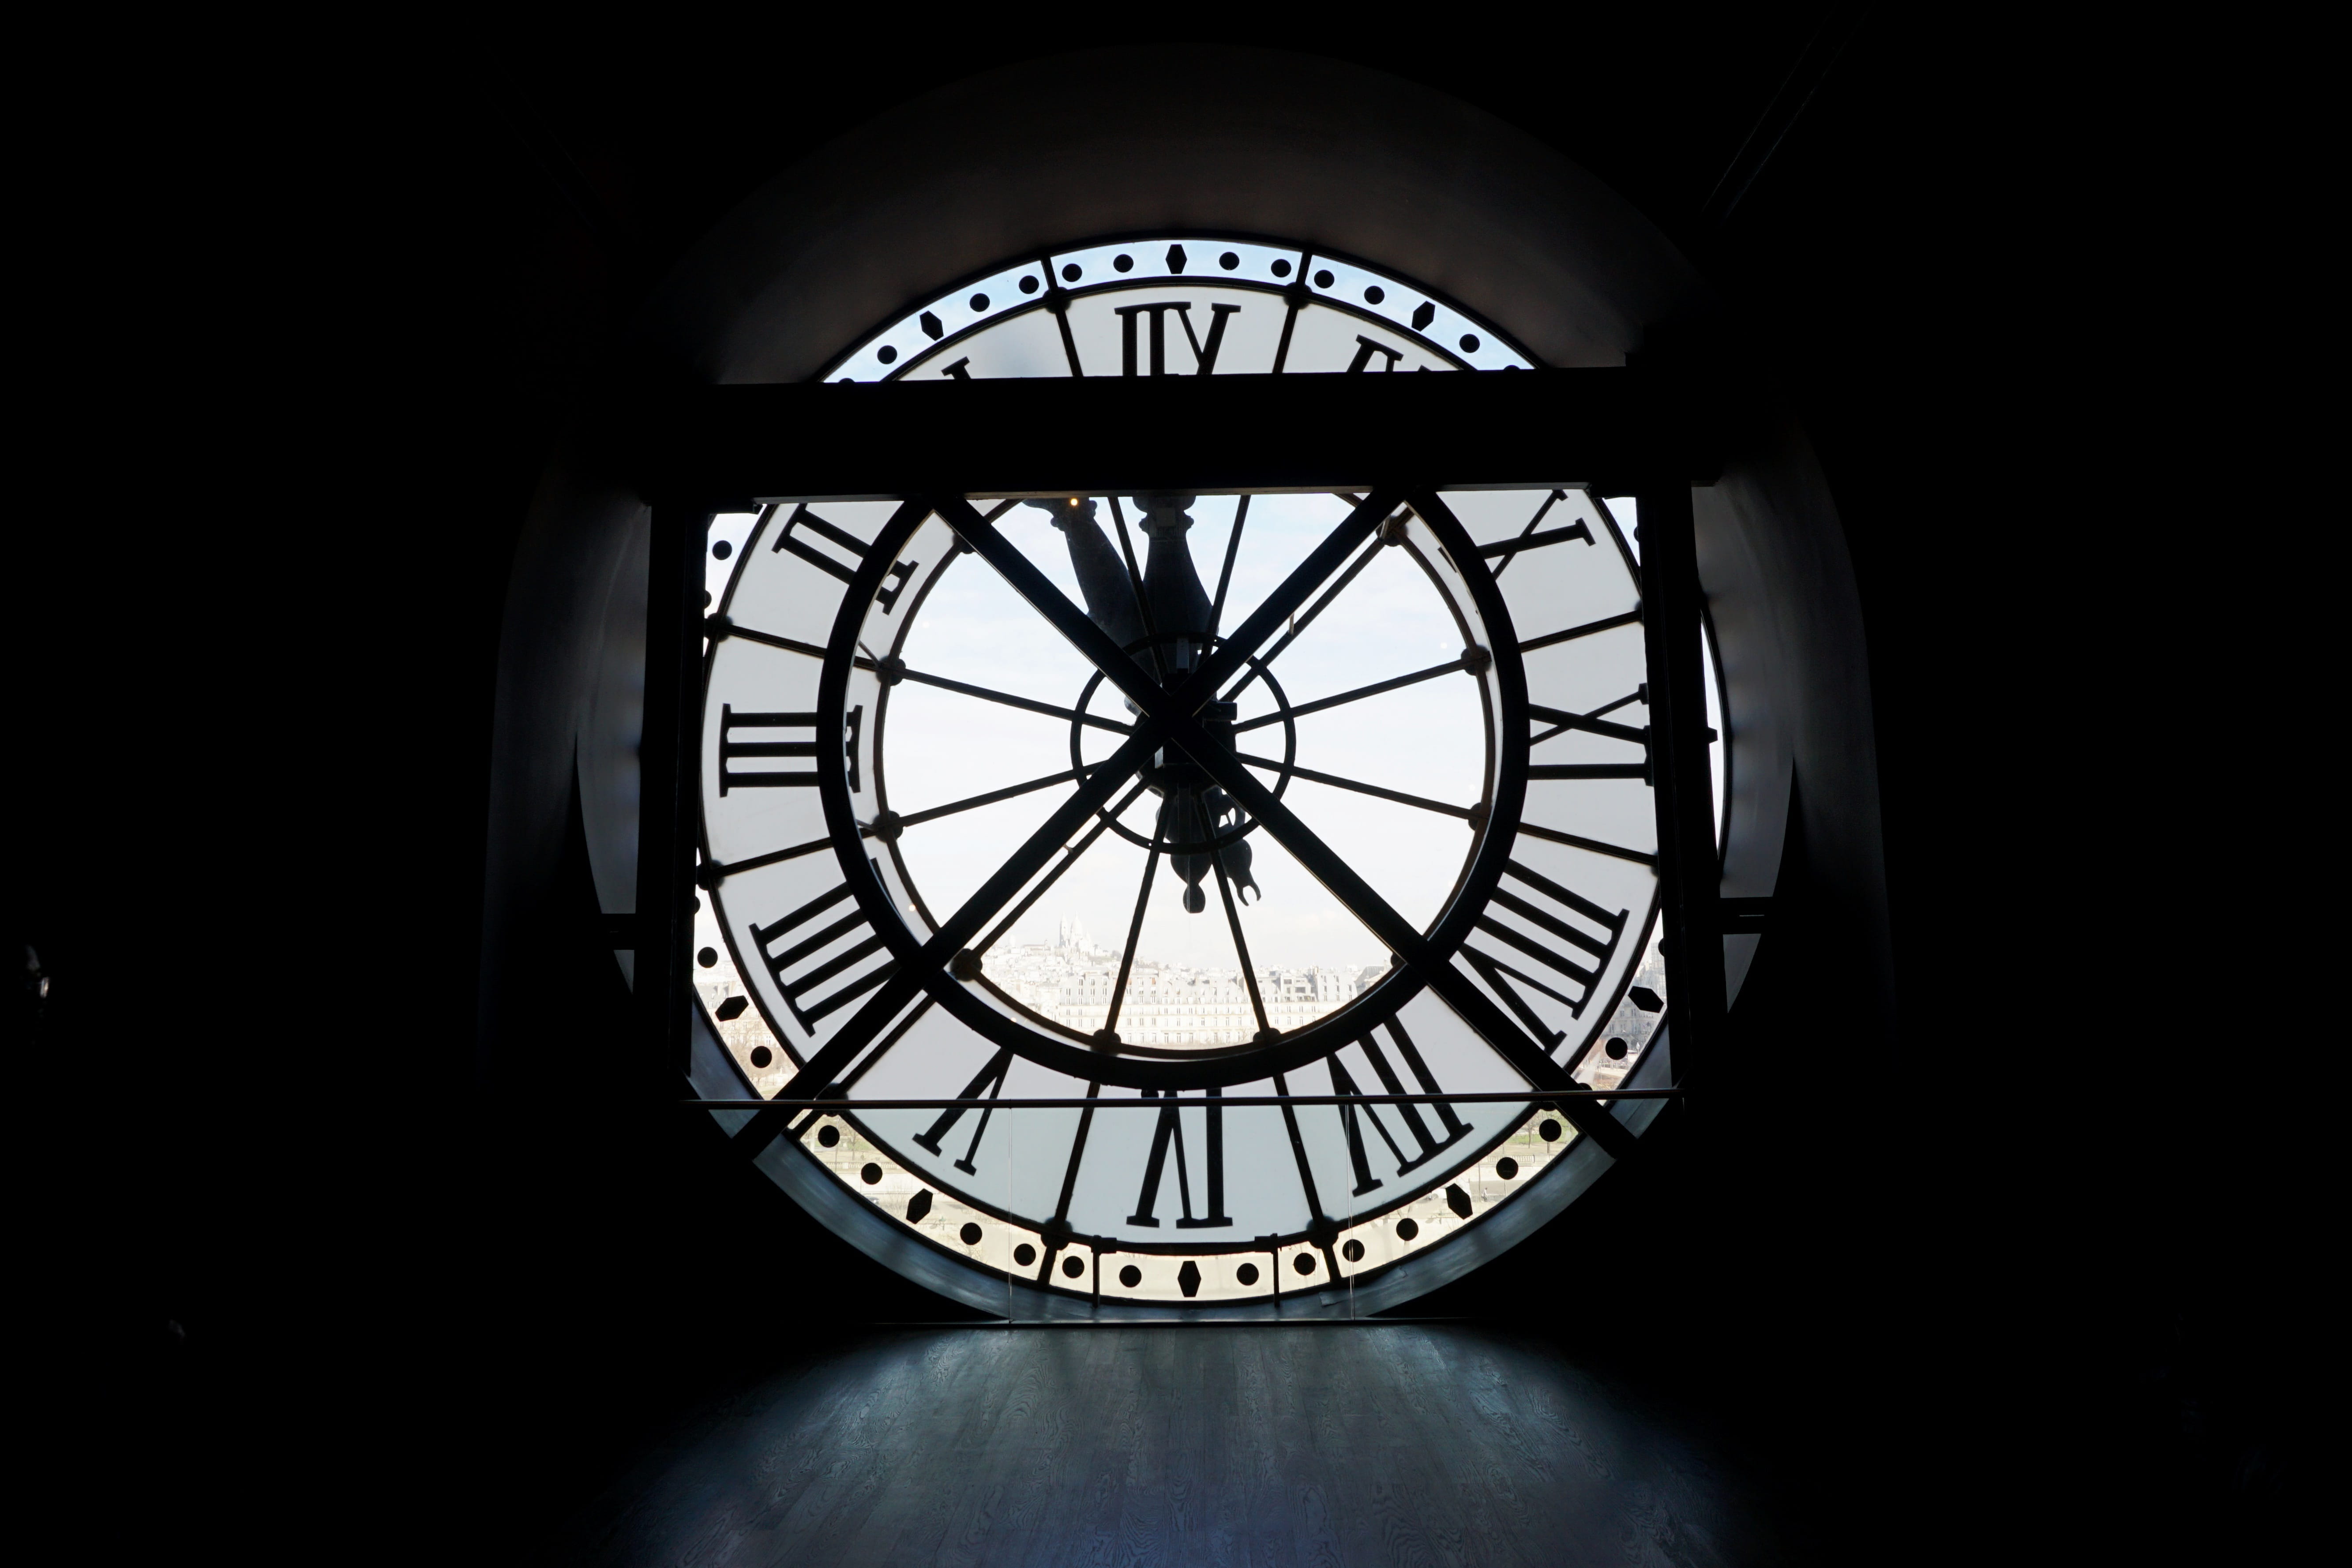 photo of clock at 11:05, watch, lancets, light, time, historian